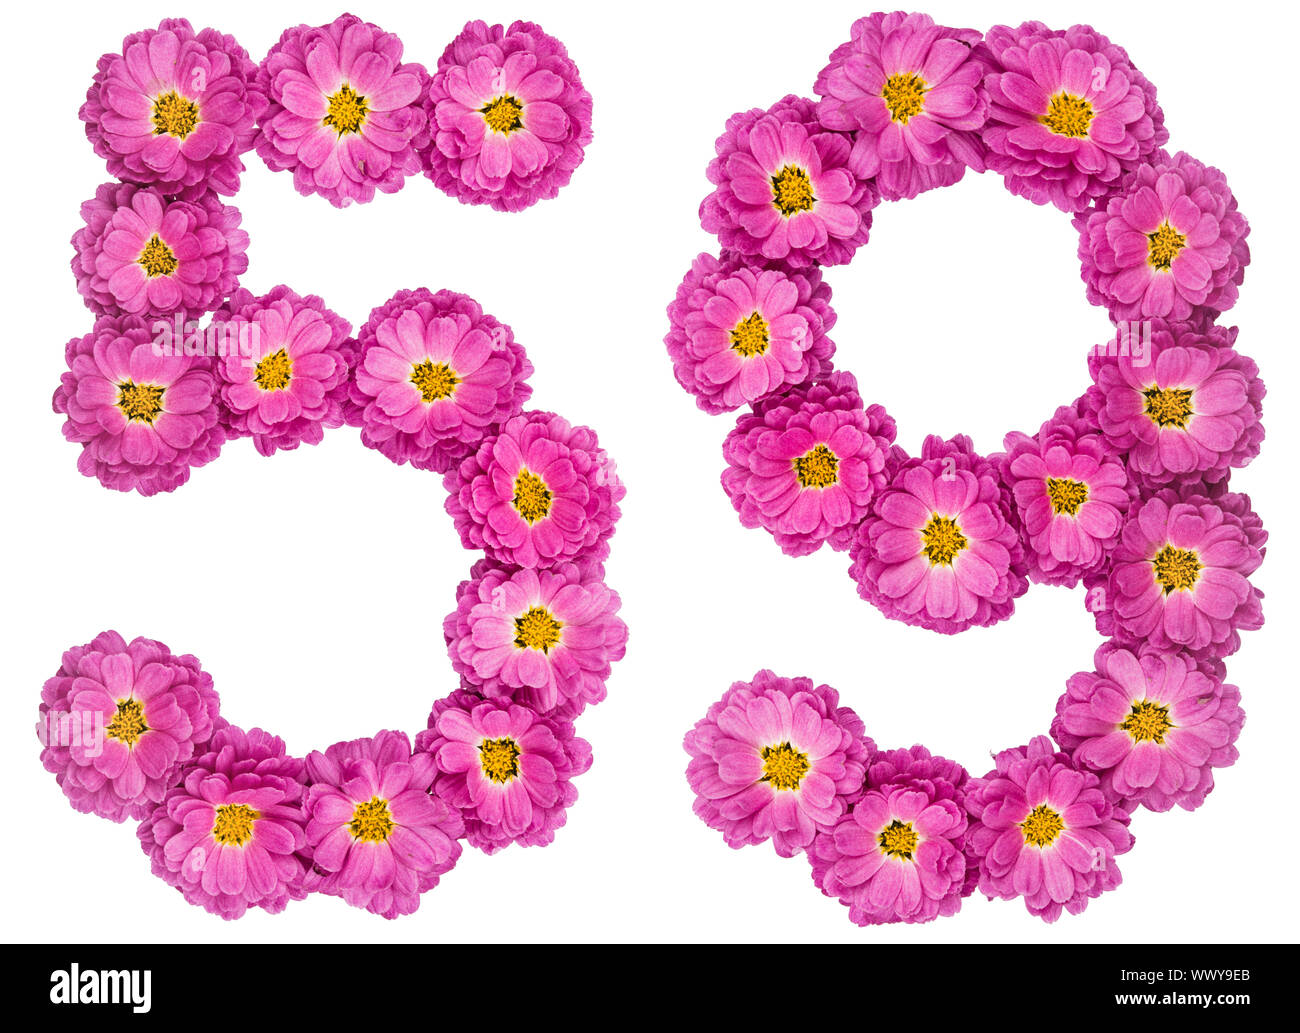 Arabic numeral 59, fifty nine,59, fifty nine, from flowers of chrysanthemum, isolated on white background Stock Photo